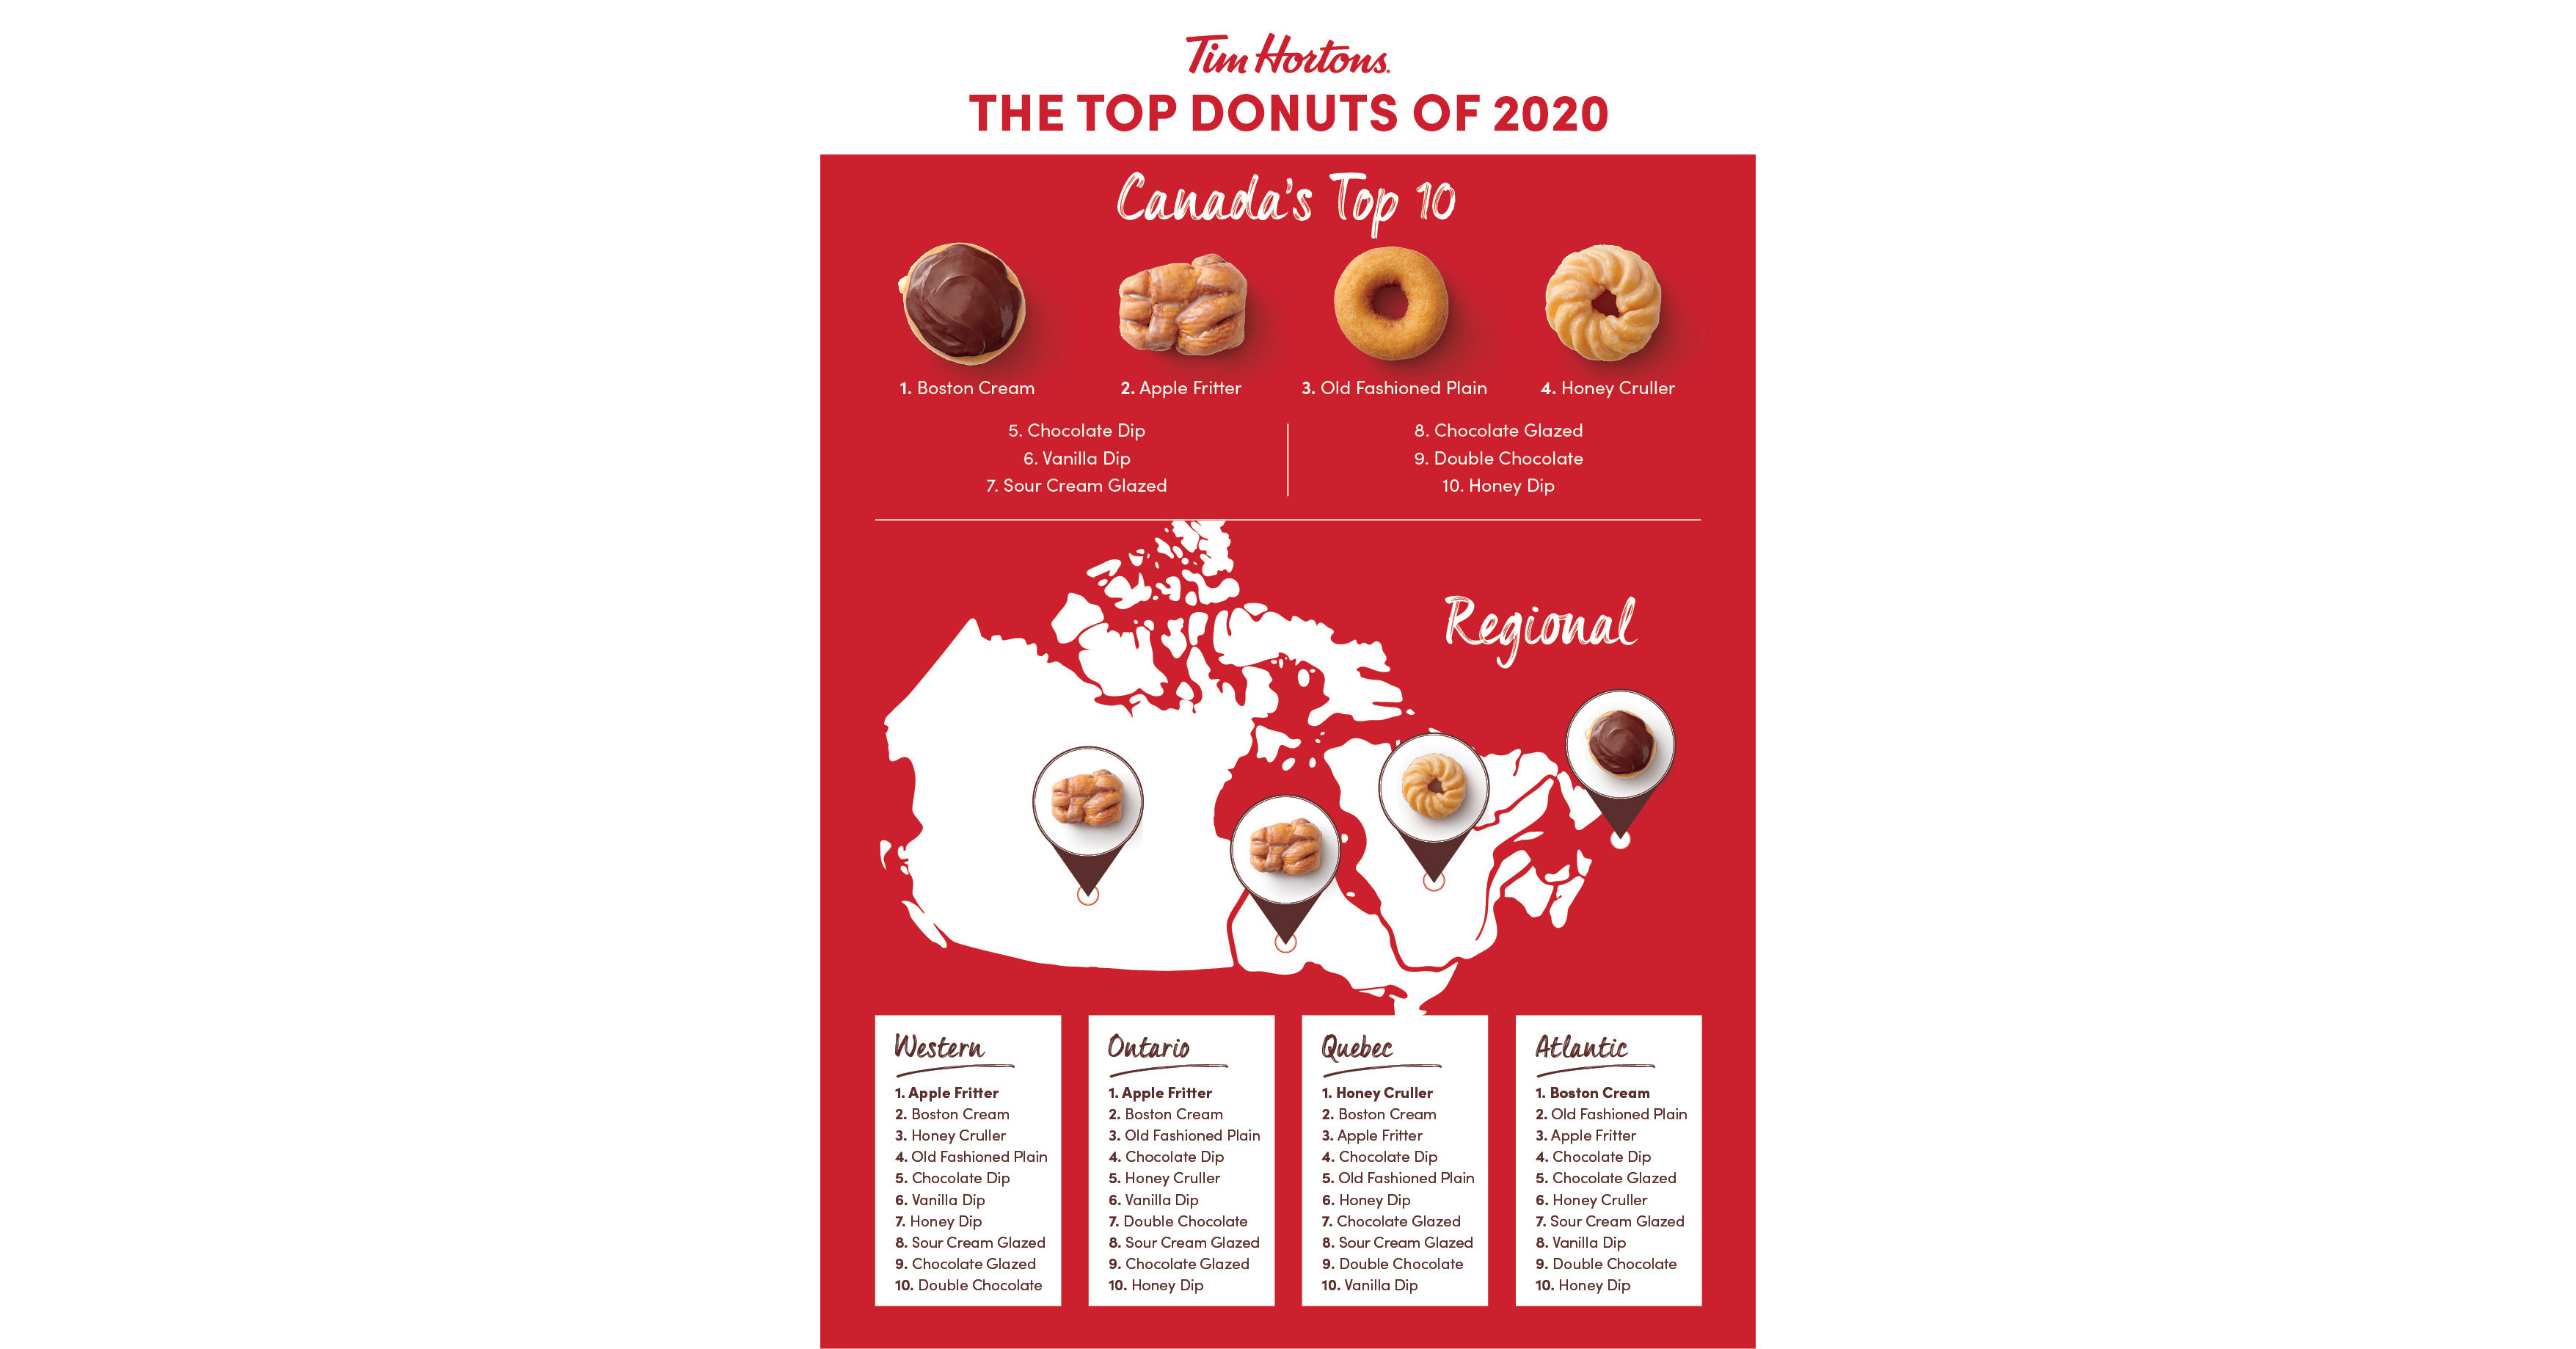 Popular Tim Hortons donuts ranked from worst to best